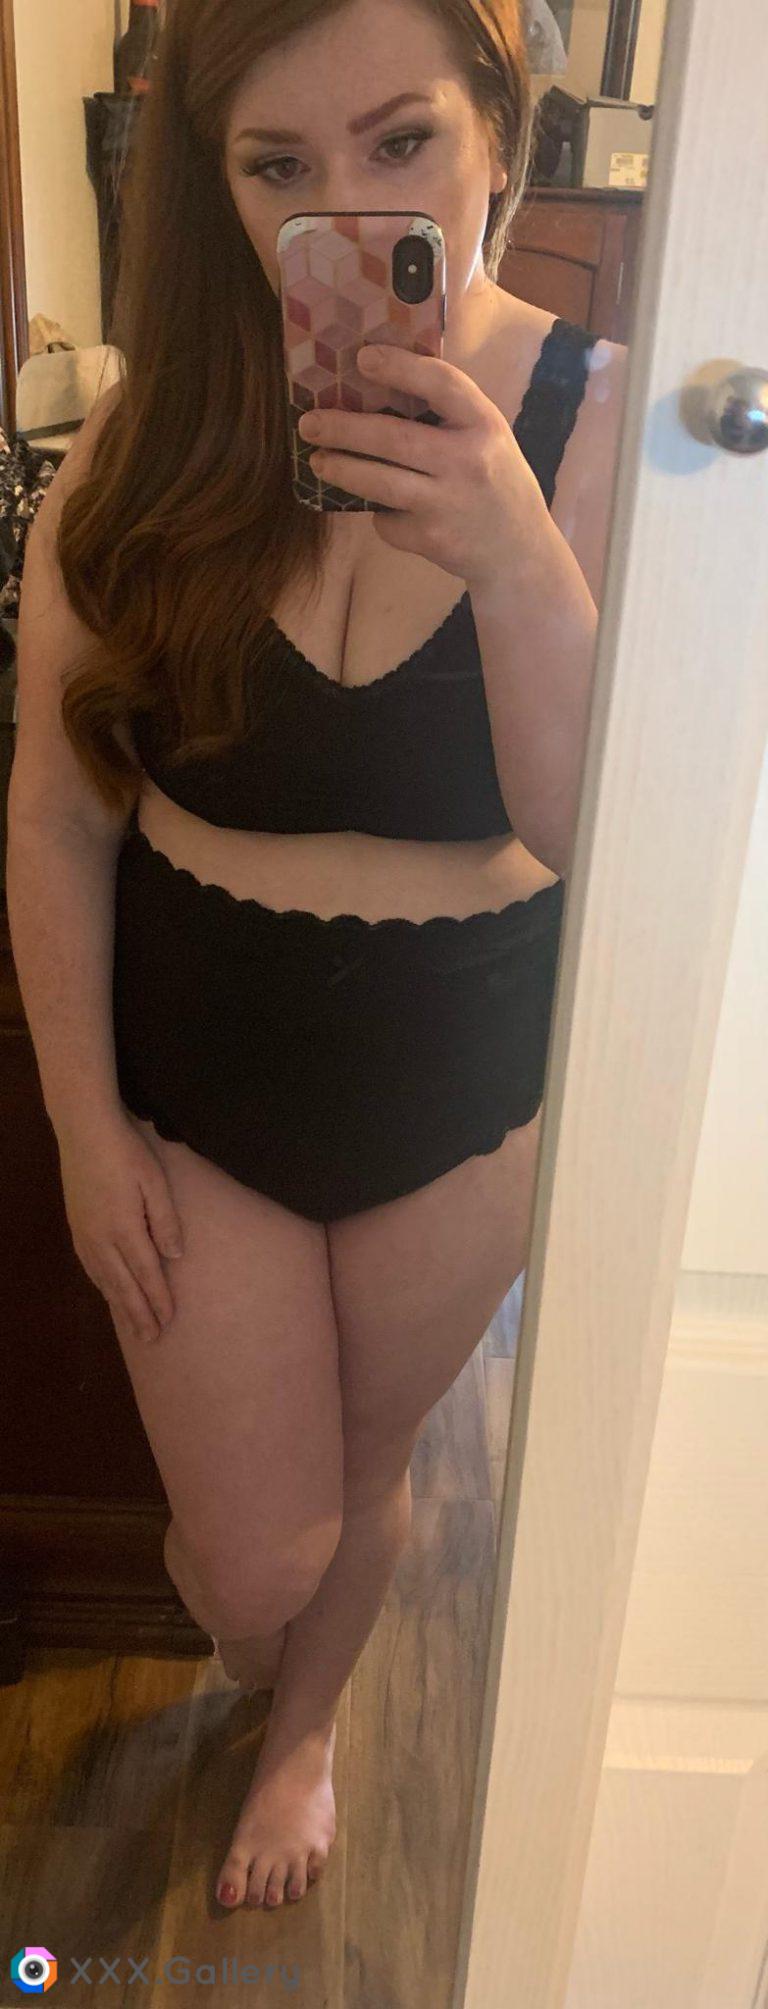 Chubby. Pale. Ginger. Feeling very insecure about putting lingerie on this postpartum body. Give me a boost?